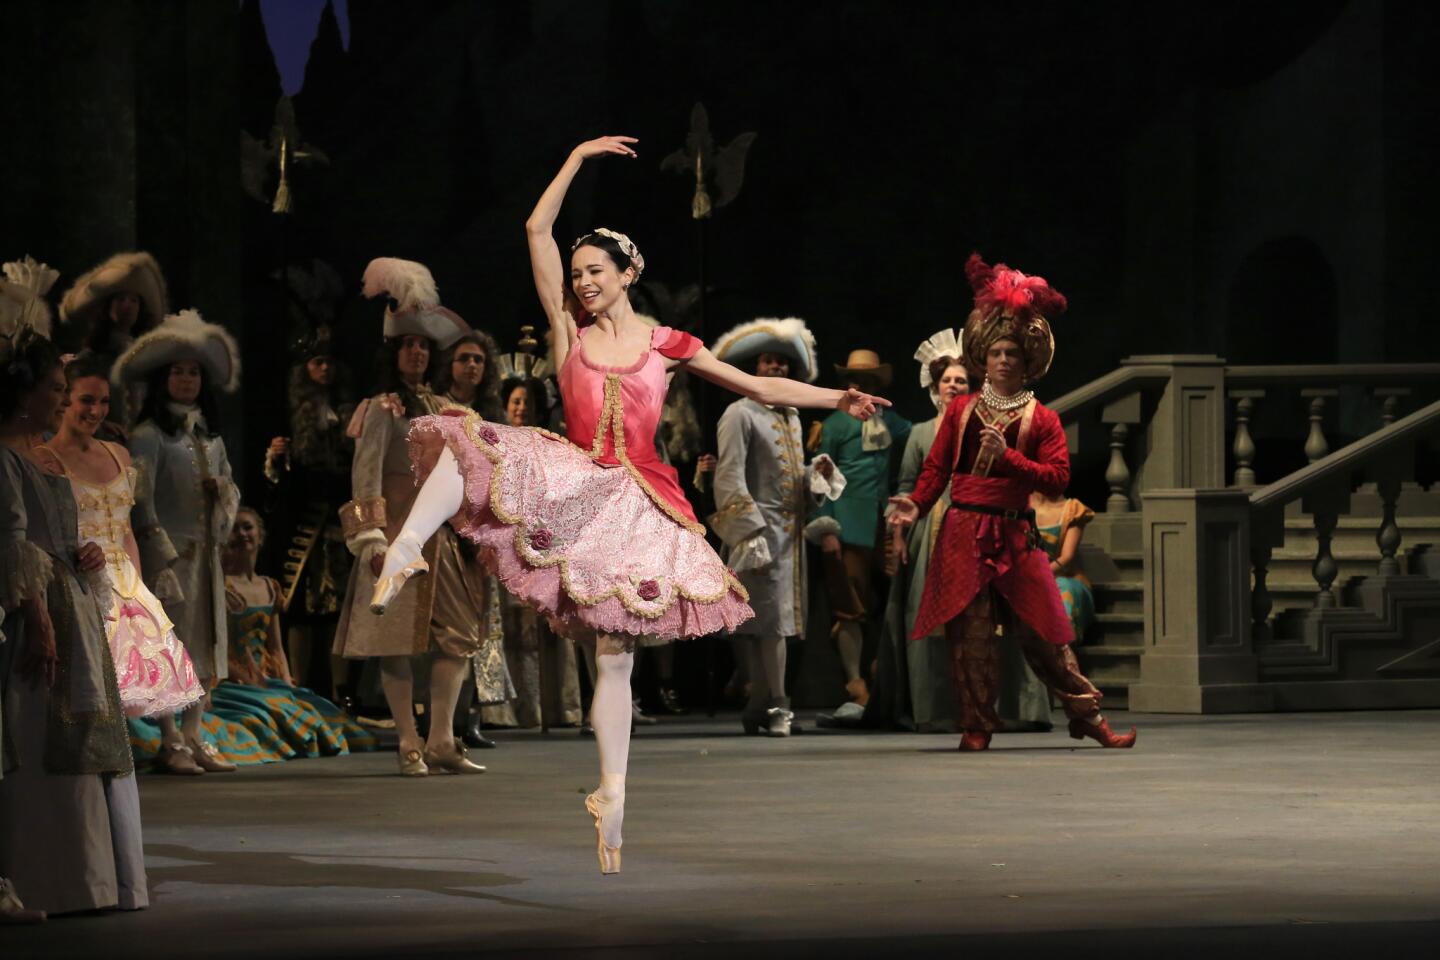 Diana Vishneva portrays opening-night Princess Aurora in the American Ballet Theatre's new production and world premiere of "The Sleeping Beauty" at the Segerstrom Center for the Arts.